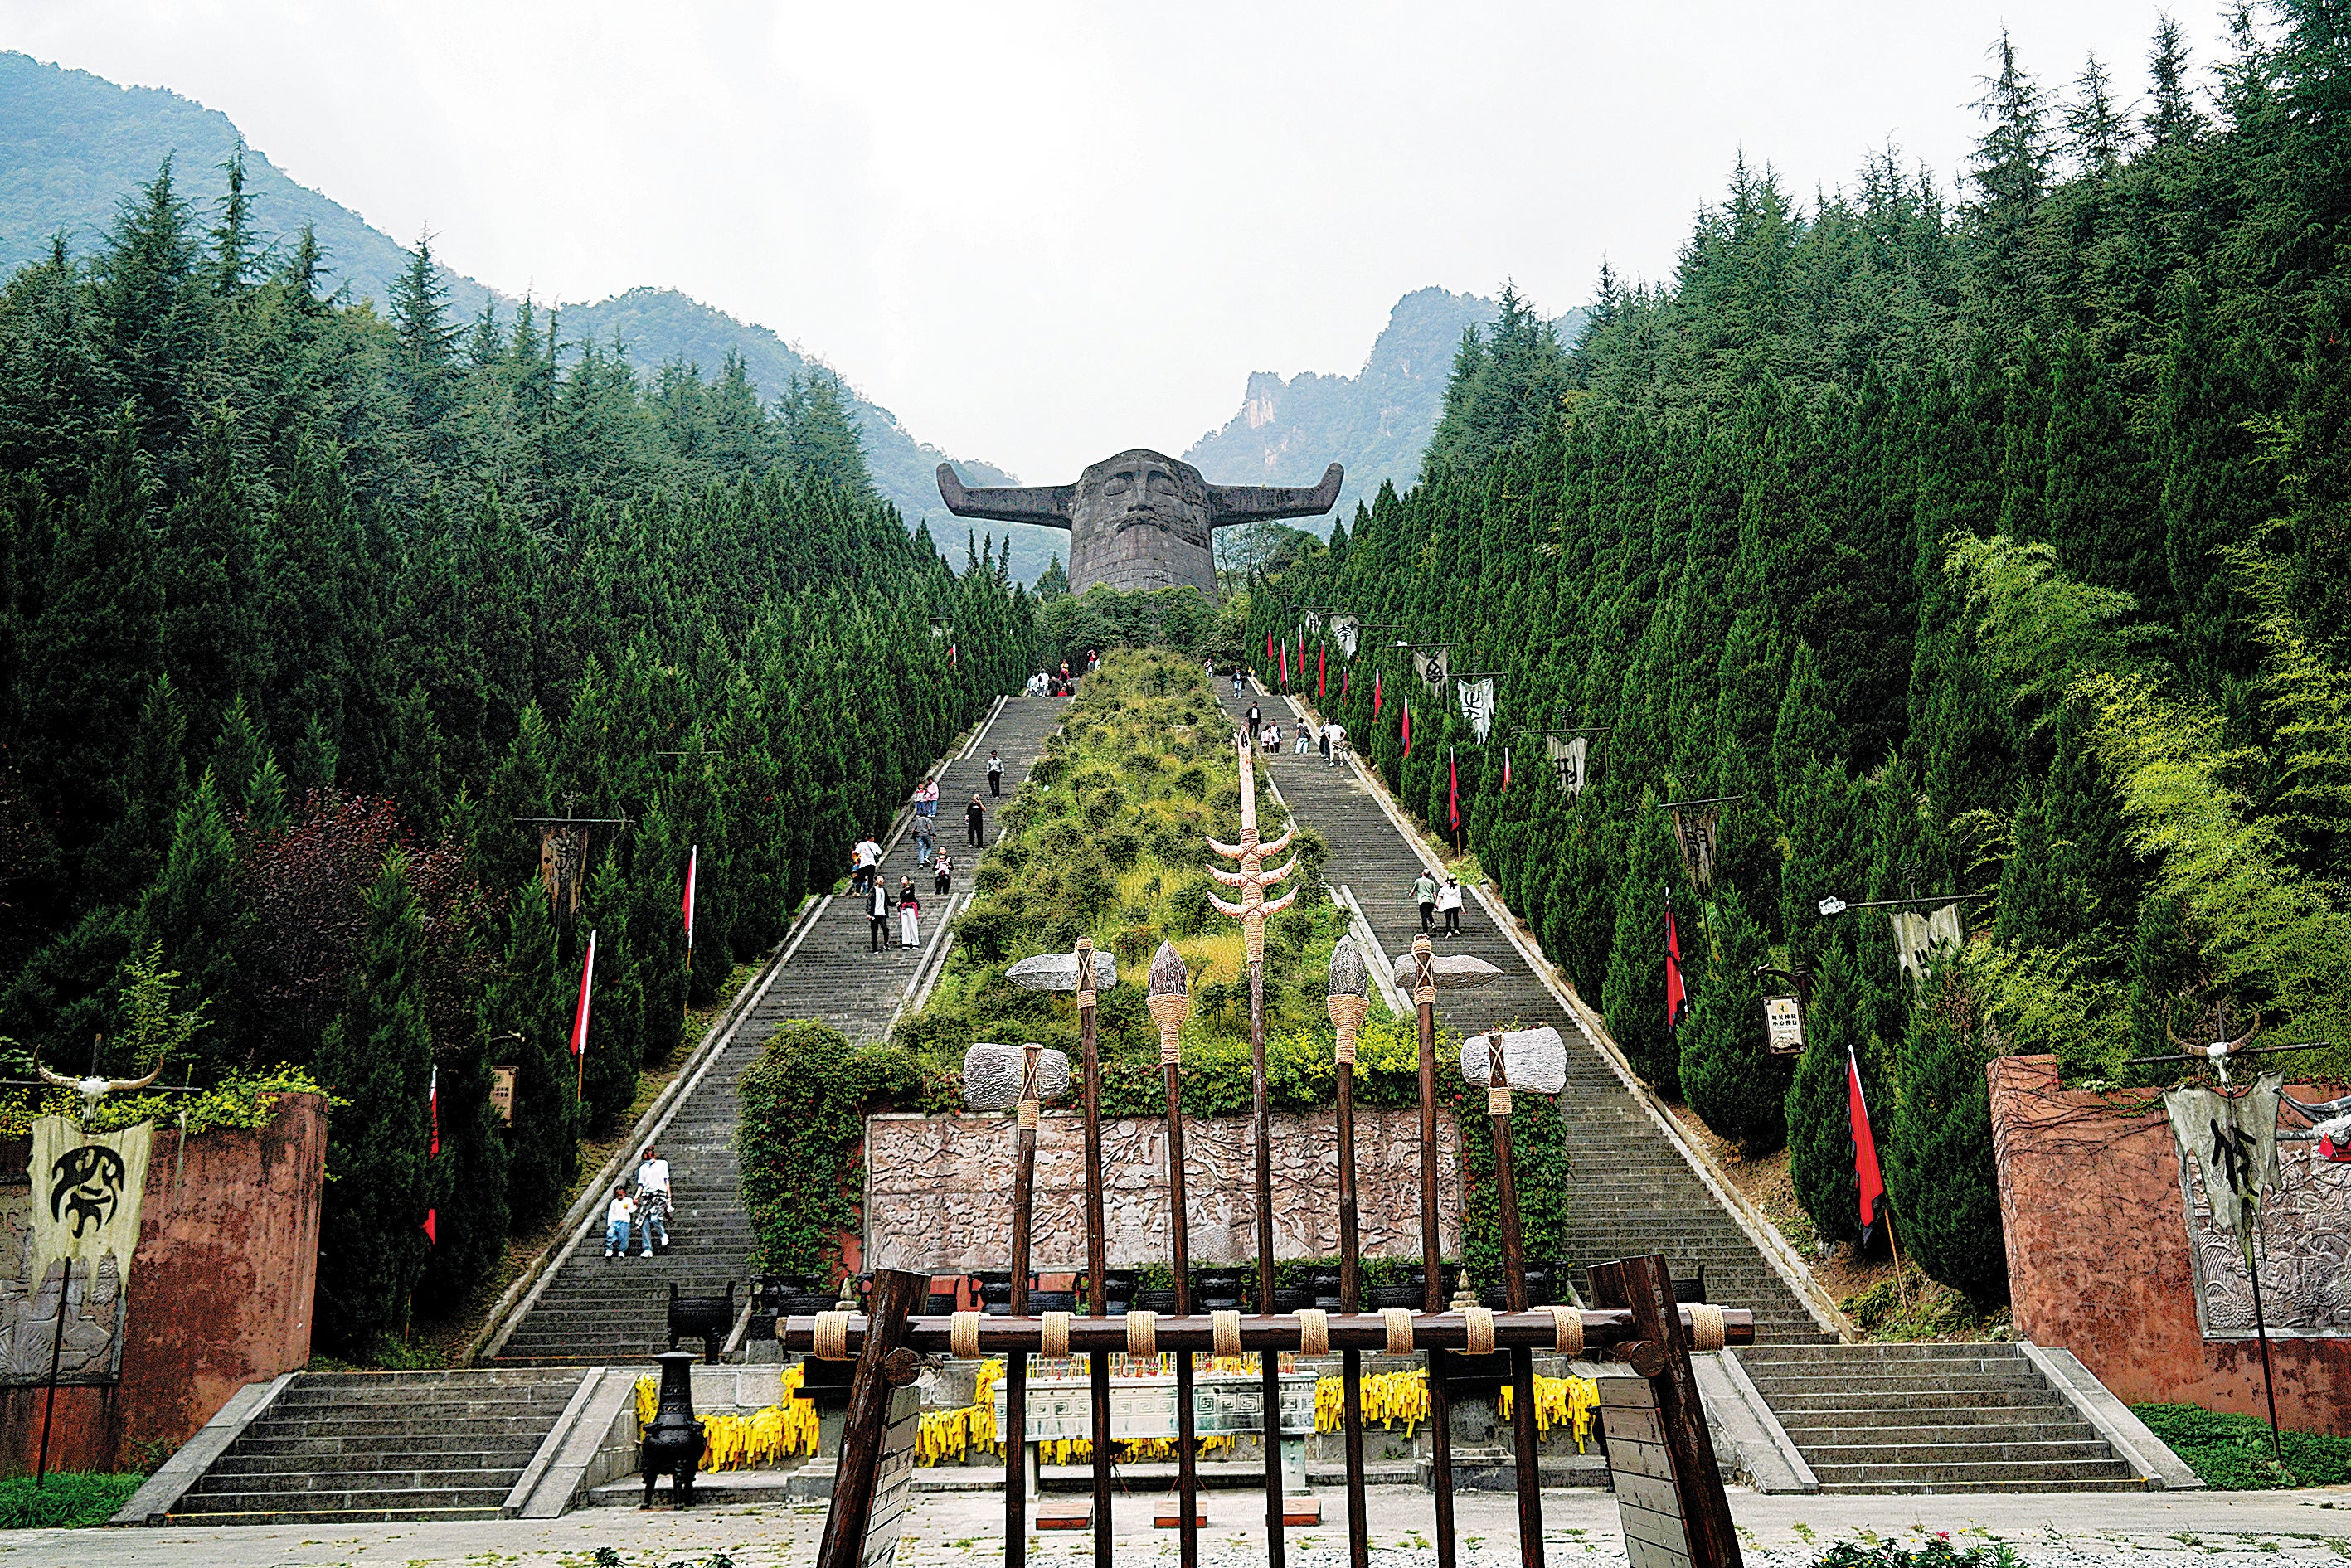 In Shennong Altar Scenic Area of Shennongjia, a long stone staircase leads to a 69ft-high stone sculpture of the head of Emperor Yan (Shennong)